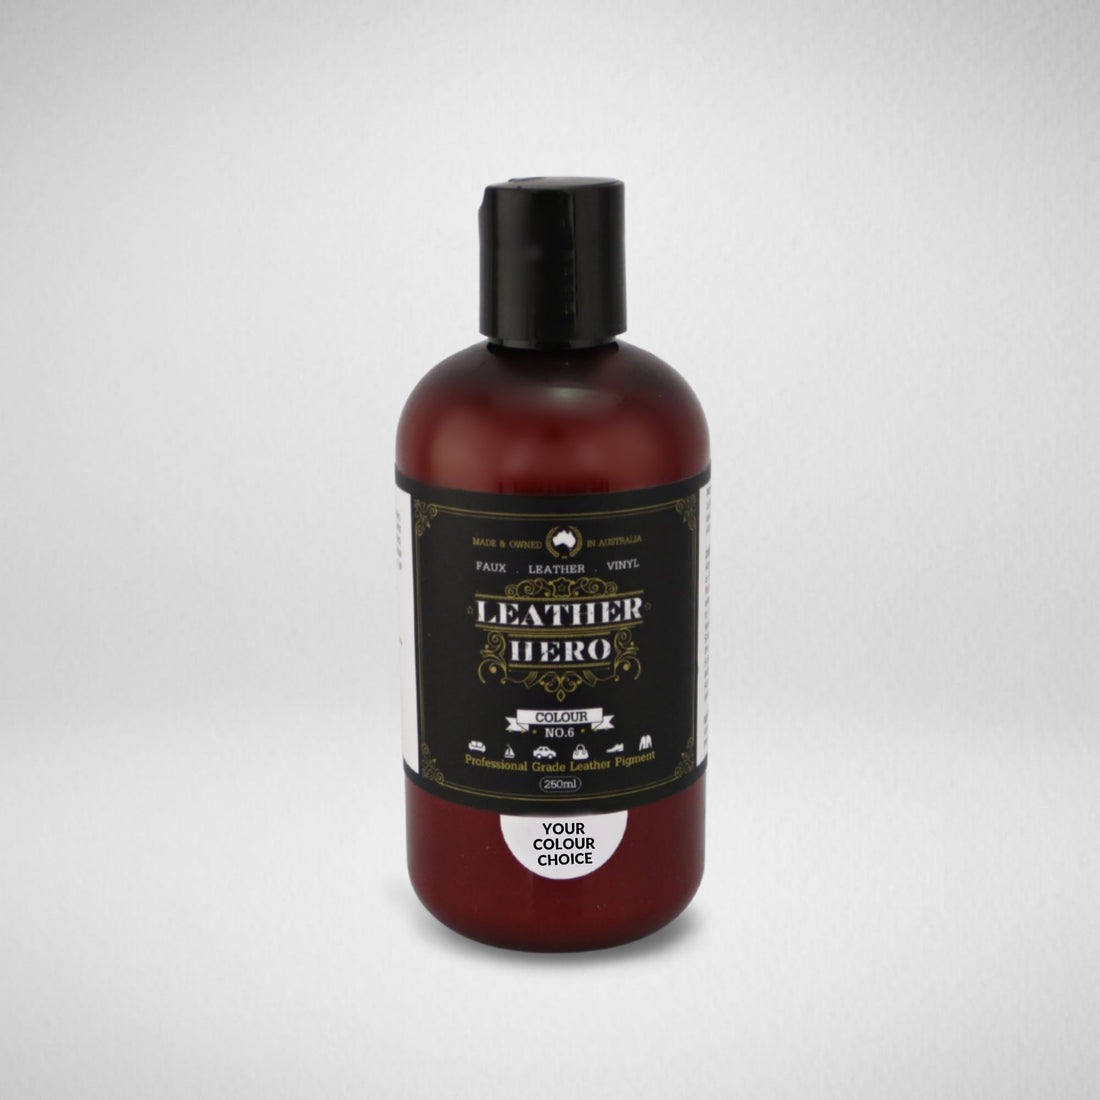 Leather Paint - Butter Leather Repair & Recolouring Leather Hero Australia